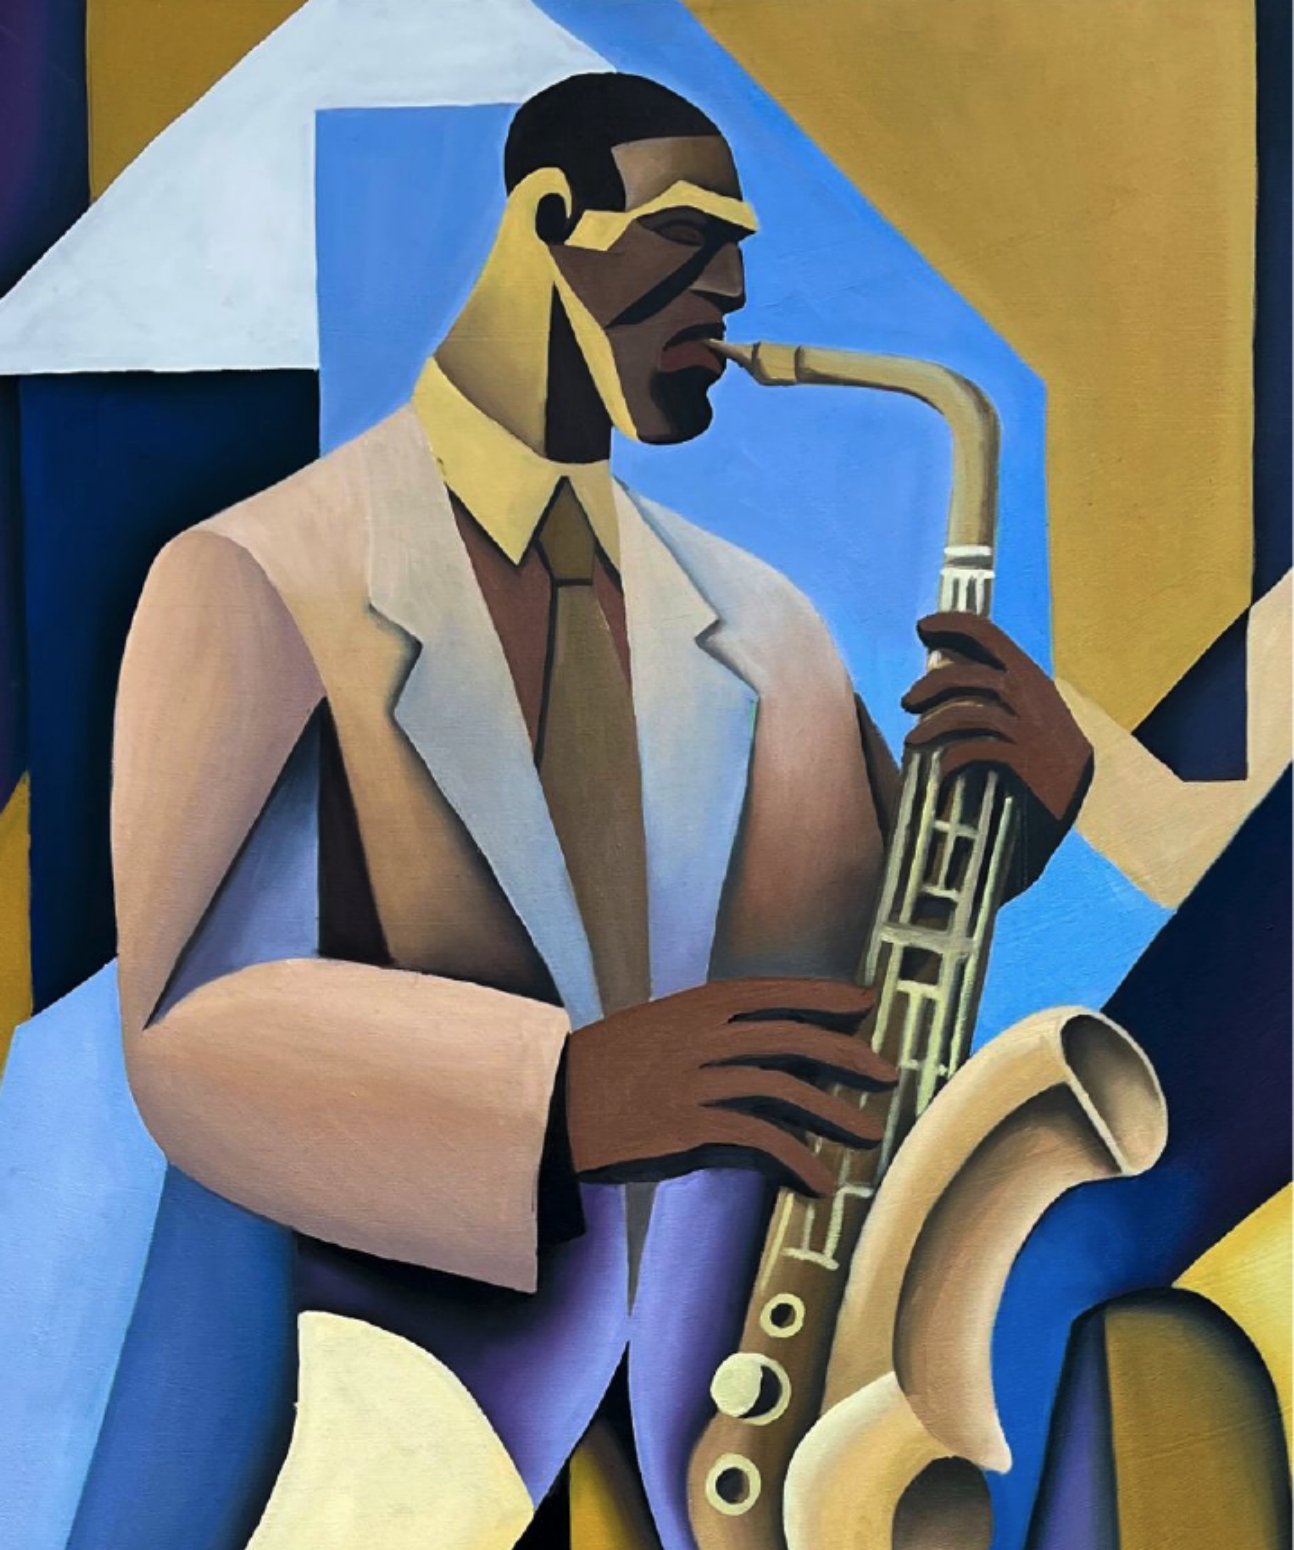 Oil painting of a Black man in a white suit and tie playing a saxophone in front of blue and yellow geometric shapes.